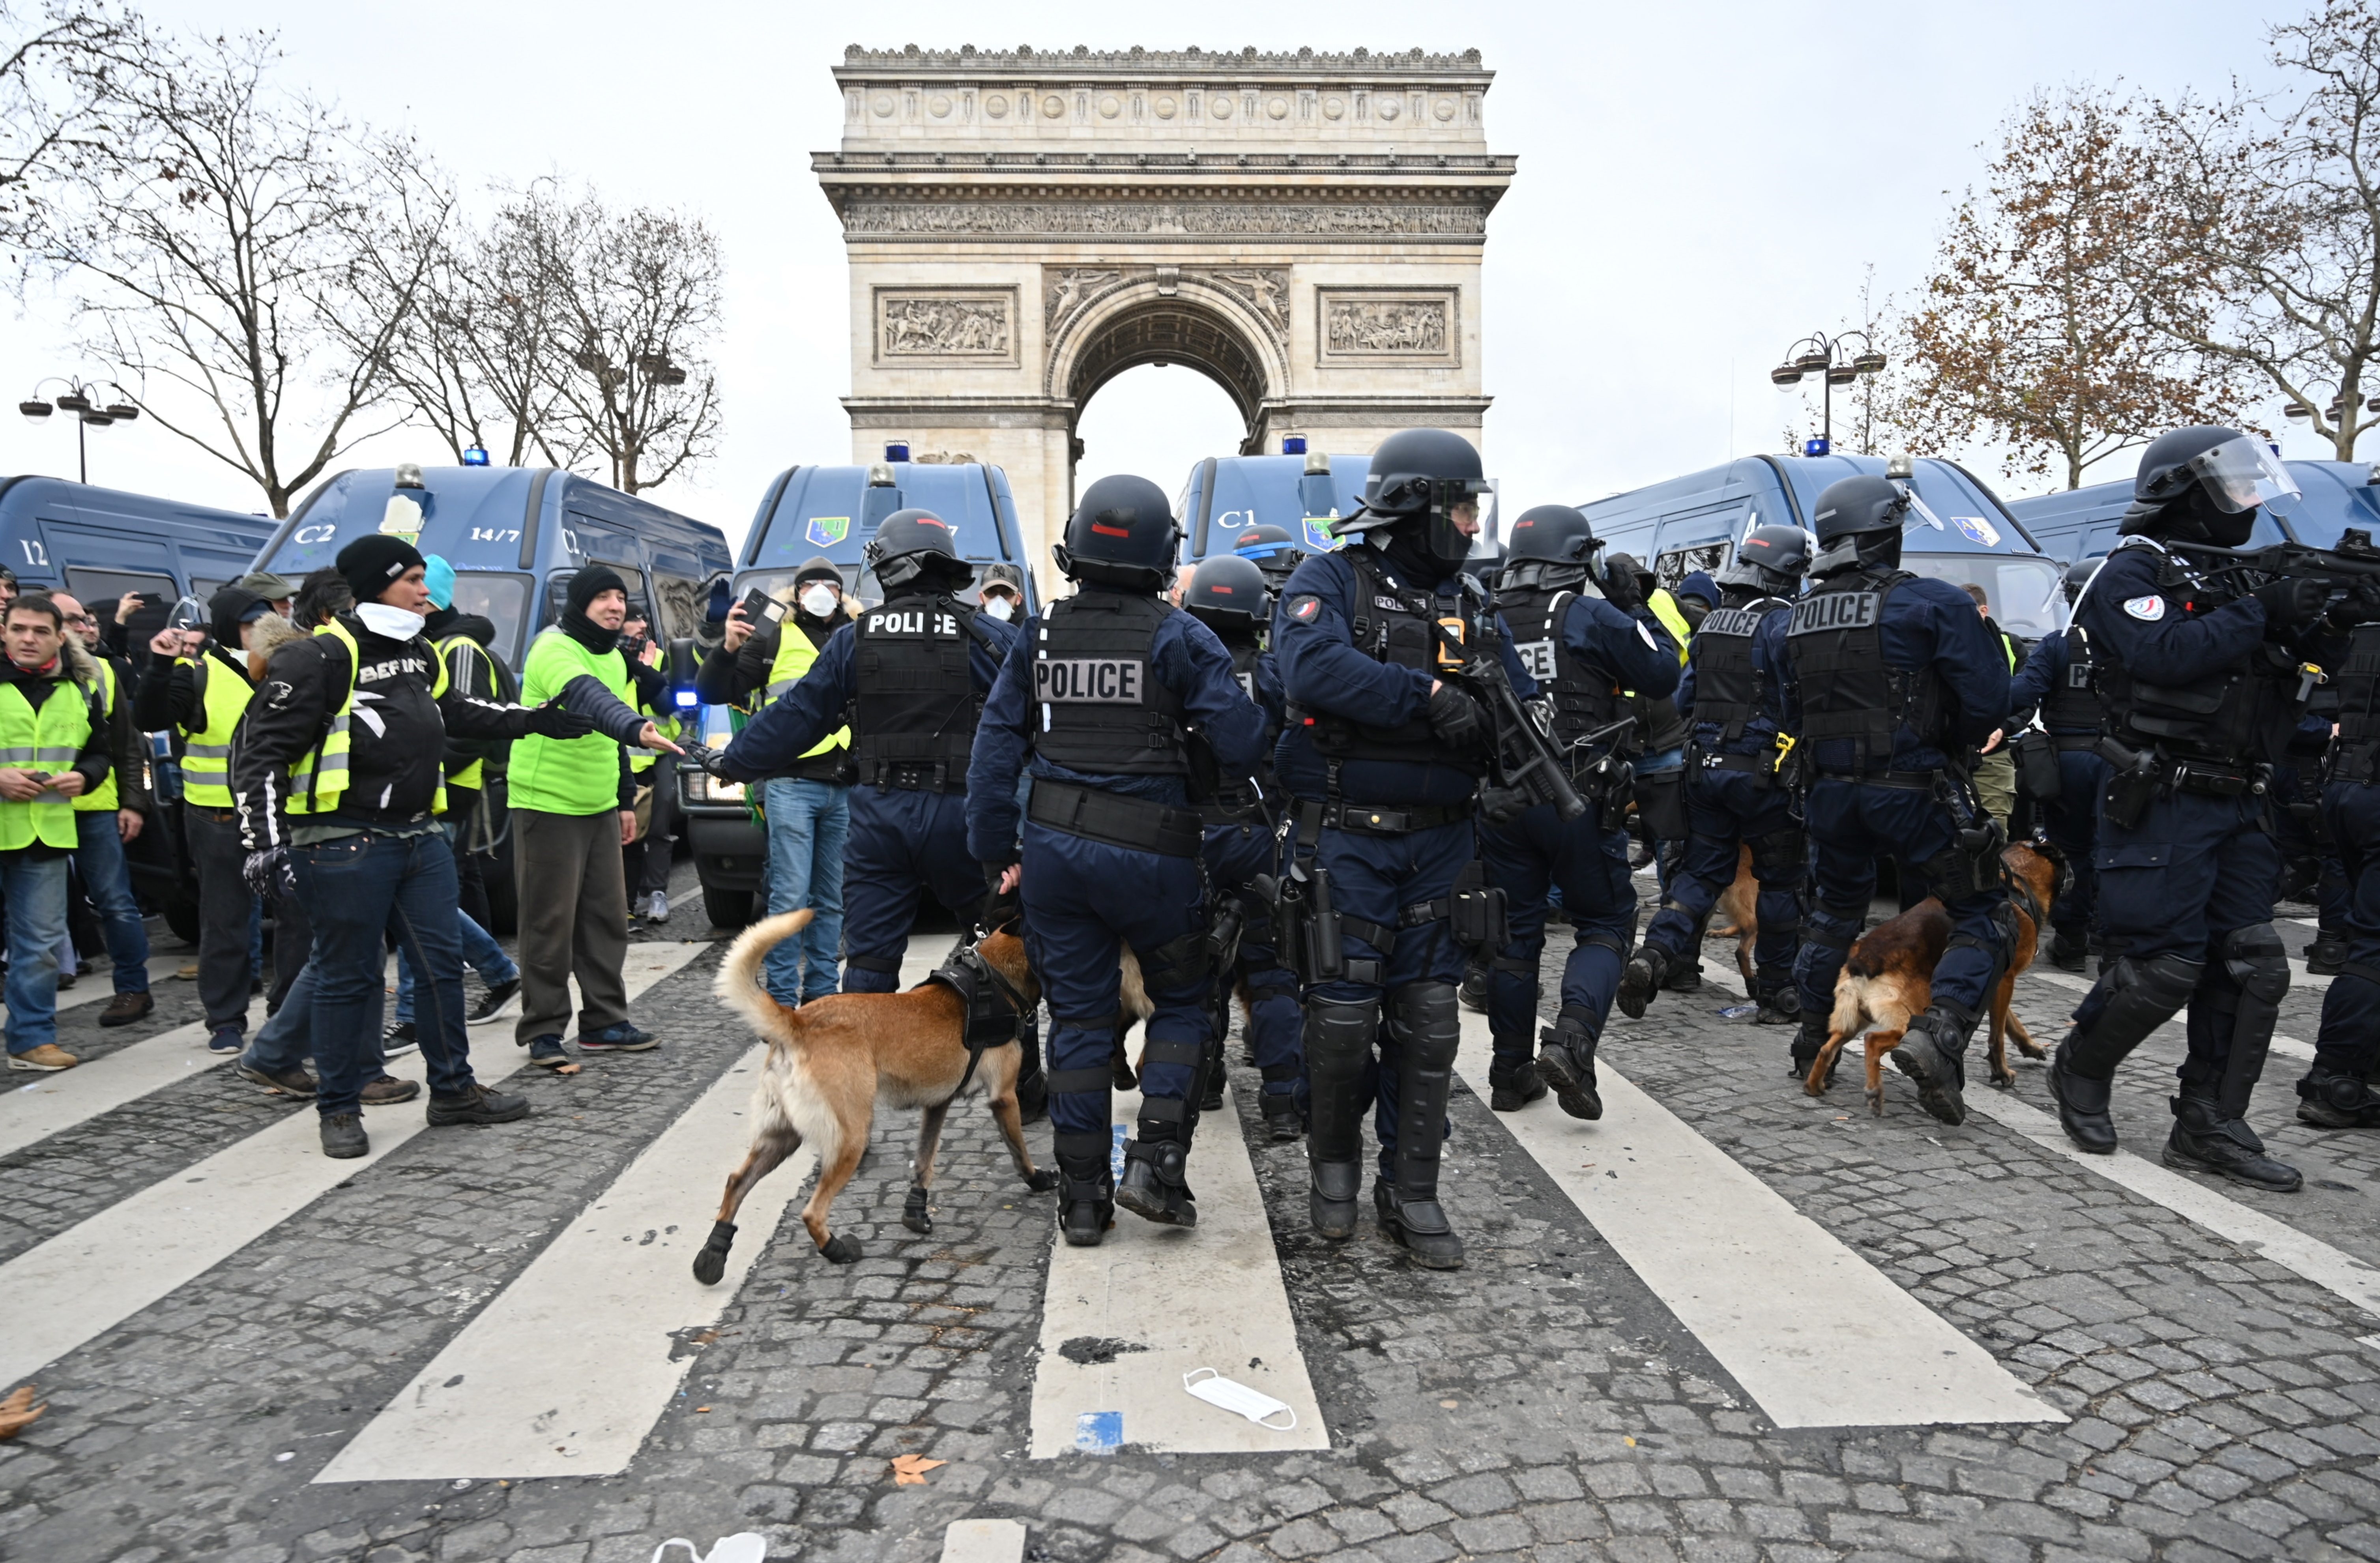 Boulevards in lockdown Hundreds of 'Yellow Vest' protesters held in